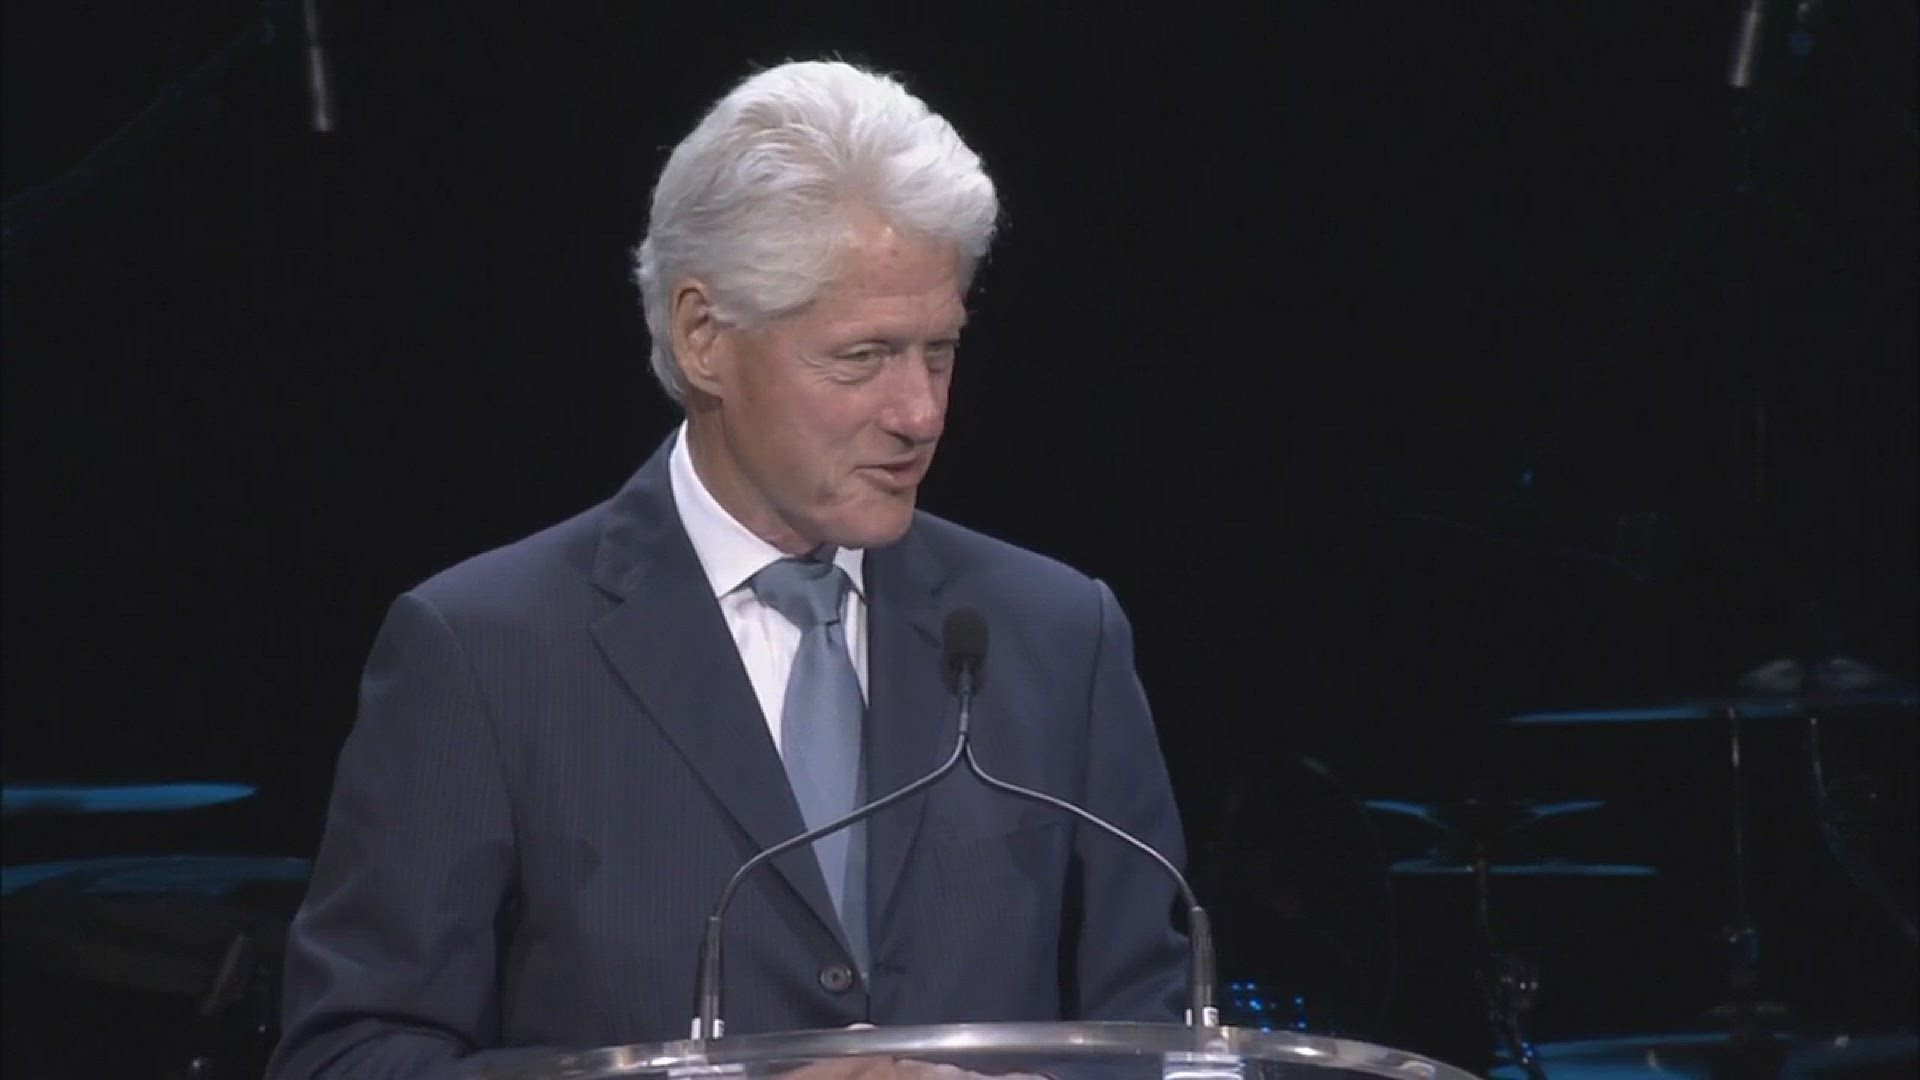 Bill Clinton addresses the crowd at Katrina 10-year commemoration event at the Smoothie King Center.